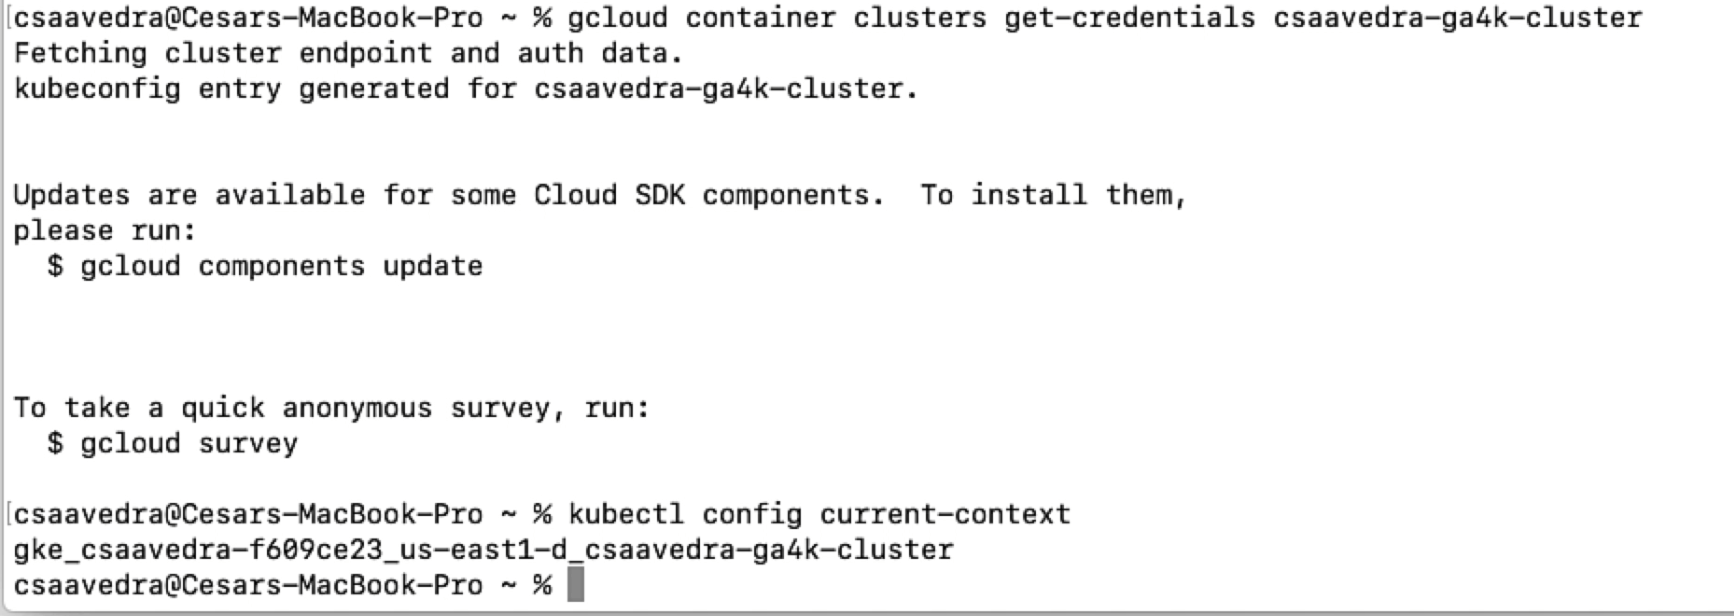 Adding your cluster credentials to your kubeconfig